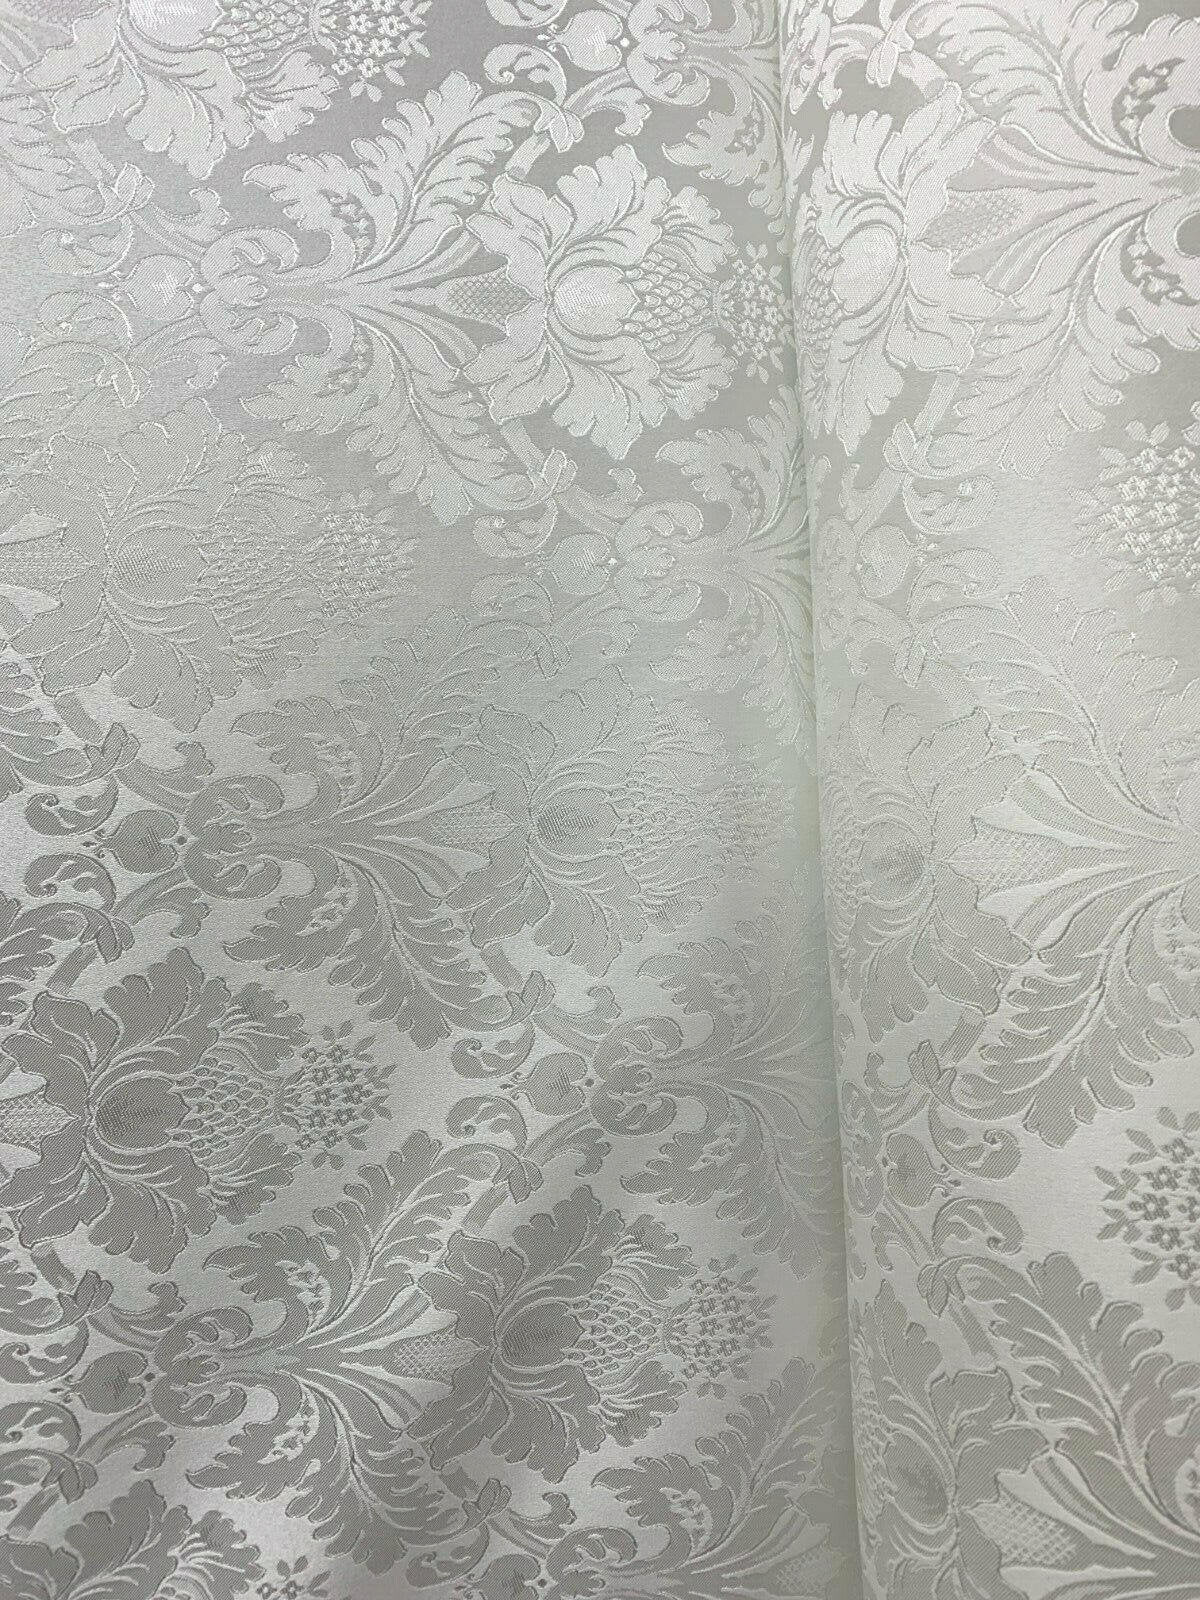 WHITE Damask Jacquard Brocade Flower Floral Fabric (110 in.) Sold By The Yard